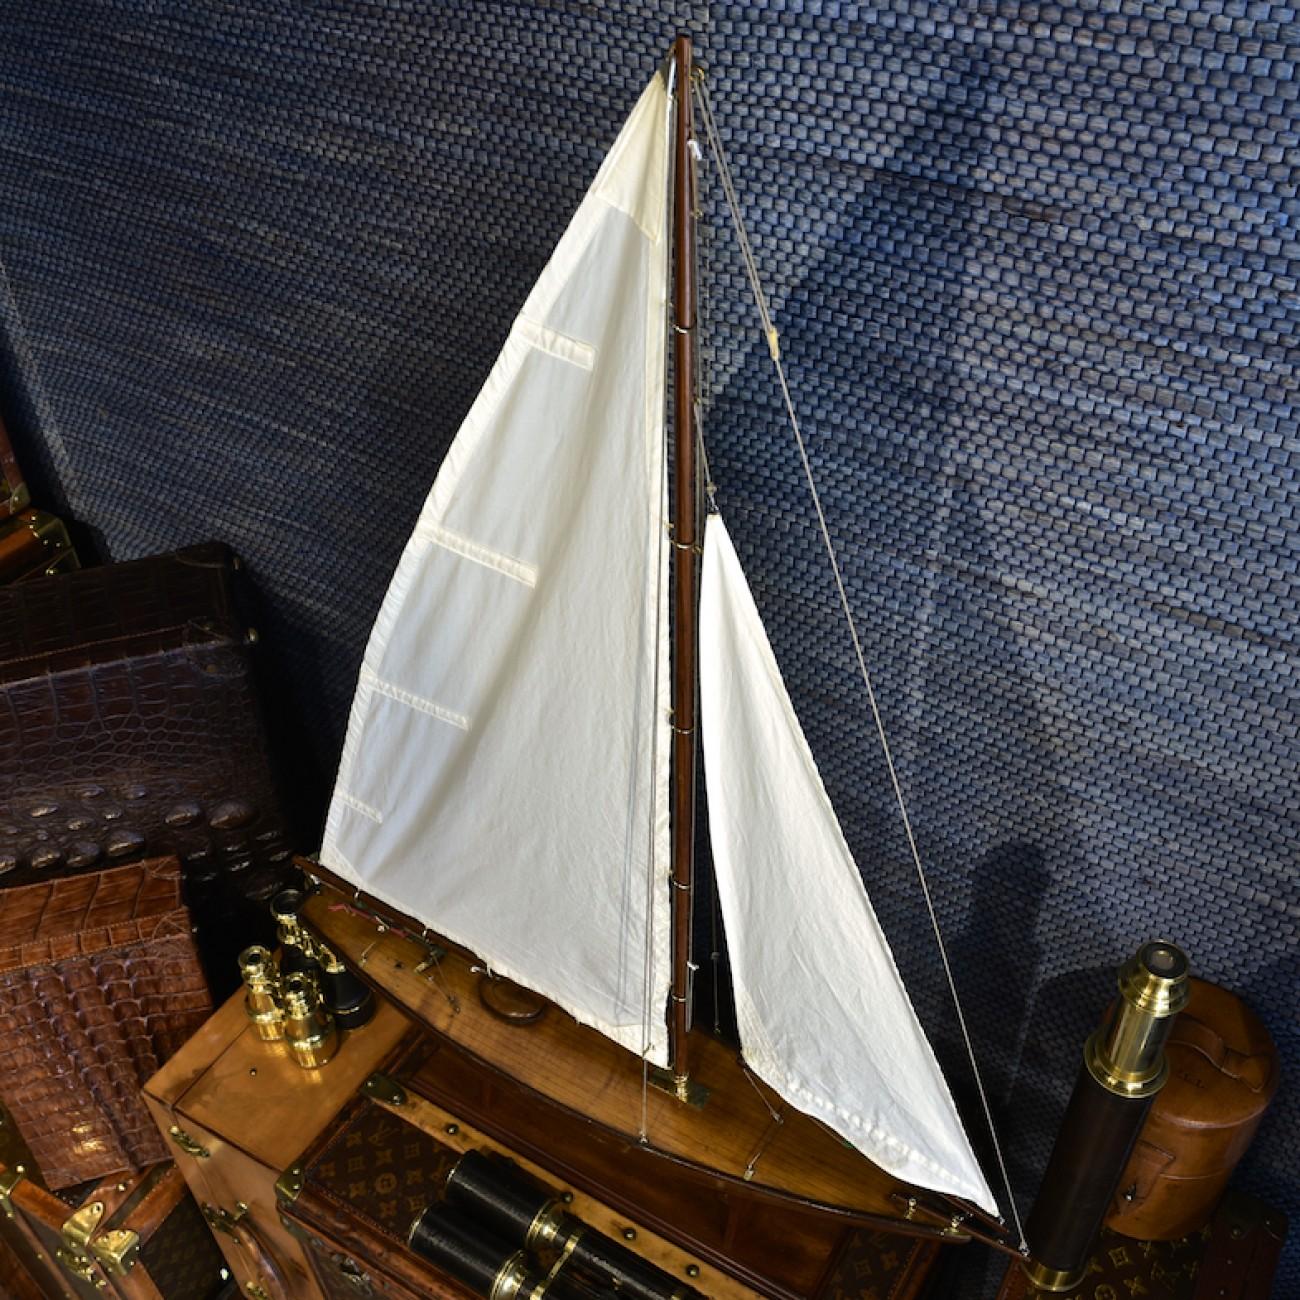 Sleek 1920s bermudan-rigged 30 inch pond yacht with balanced main sail steering gear and lead keel. The sails are copies of the originals and the model sits on a newly made stand using old timber.

A main sheet steering mechanism uses balance gear,